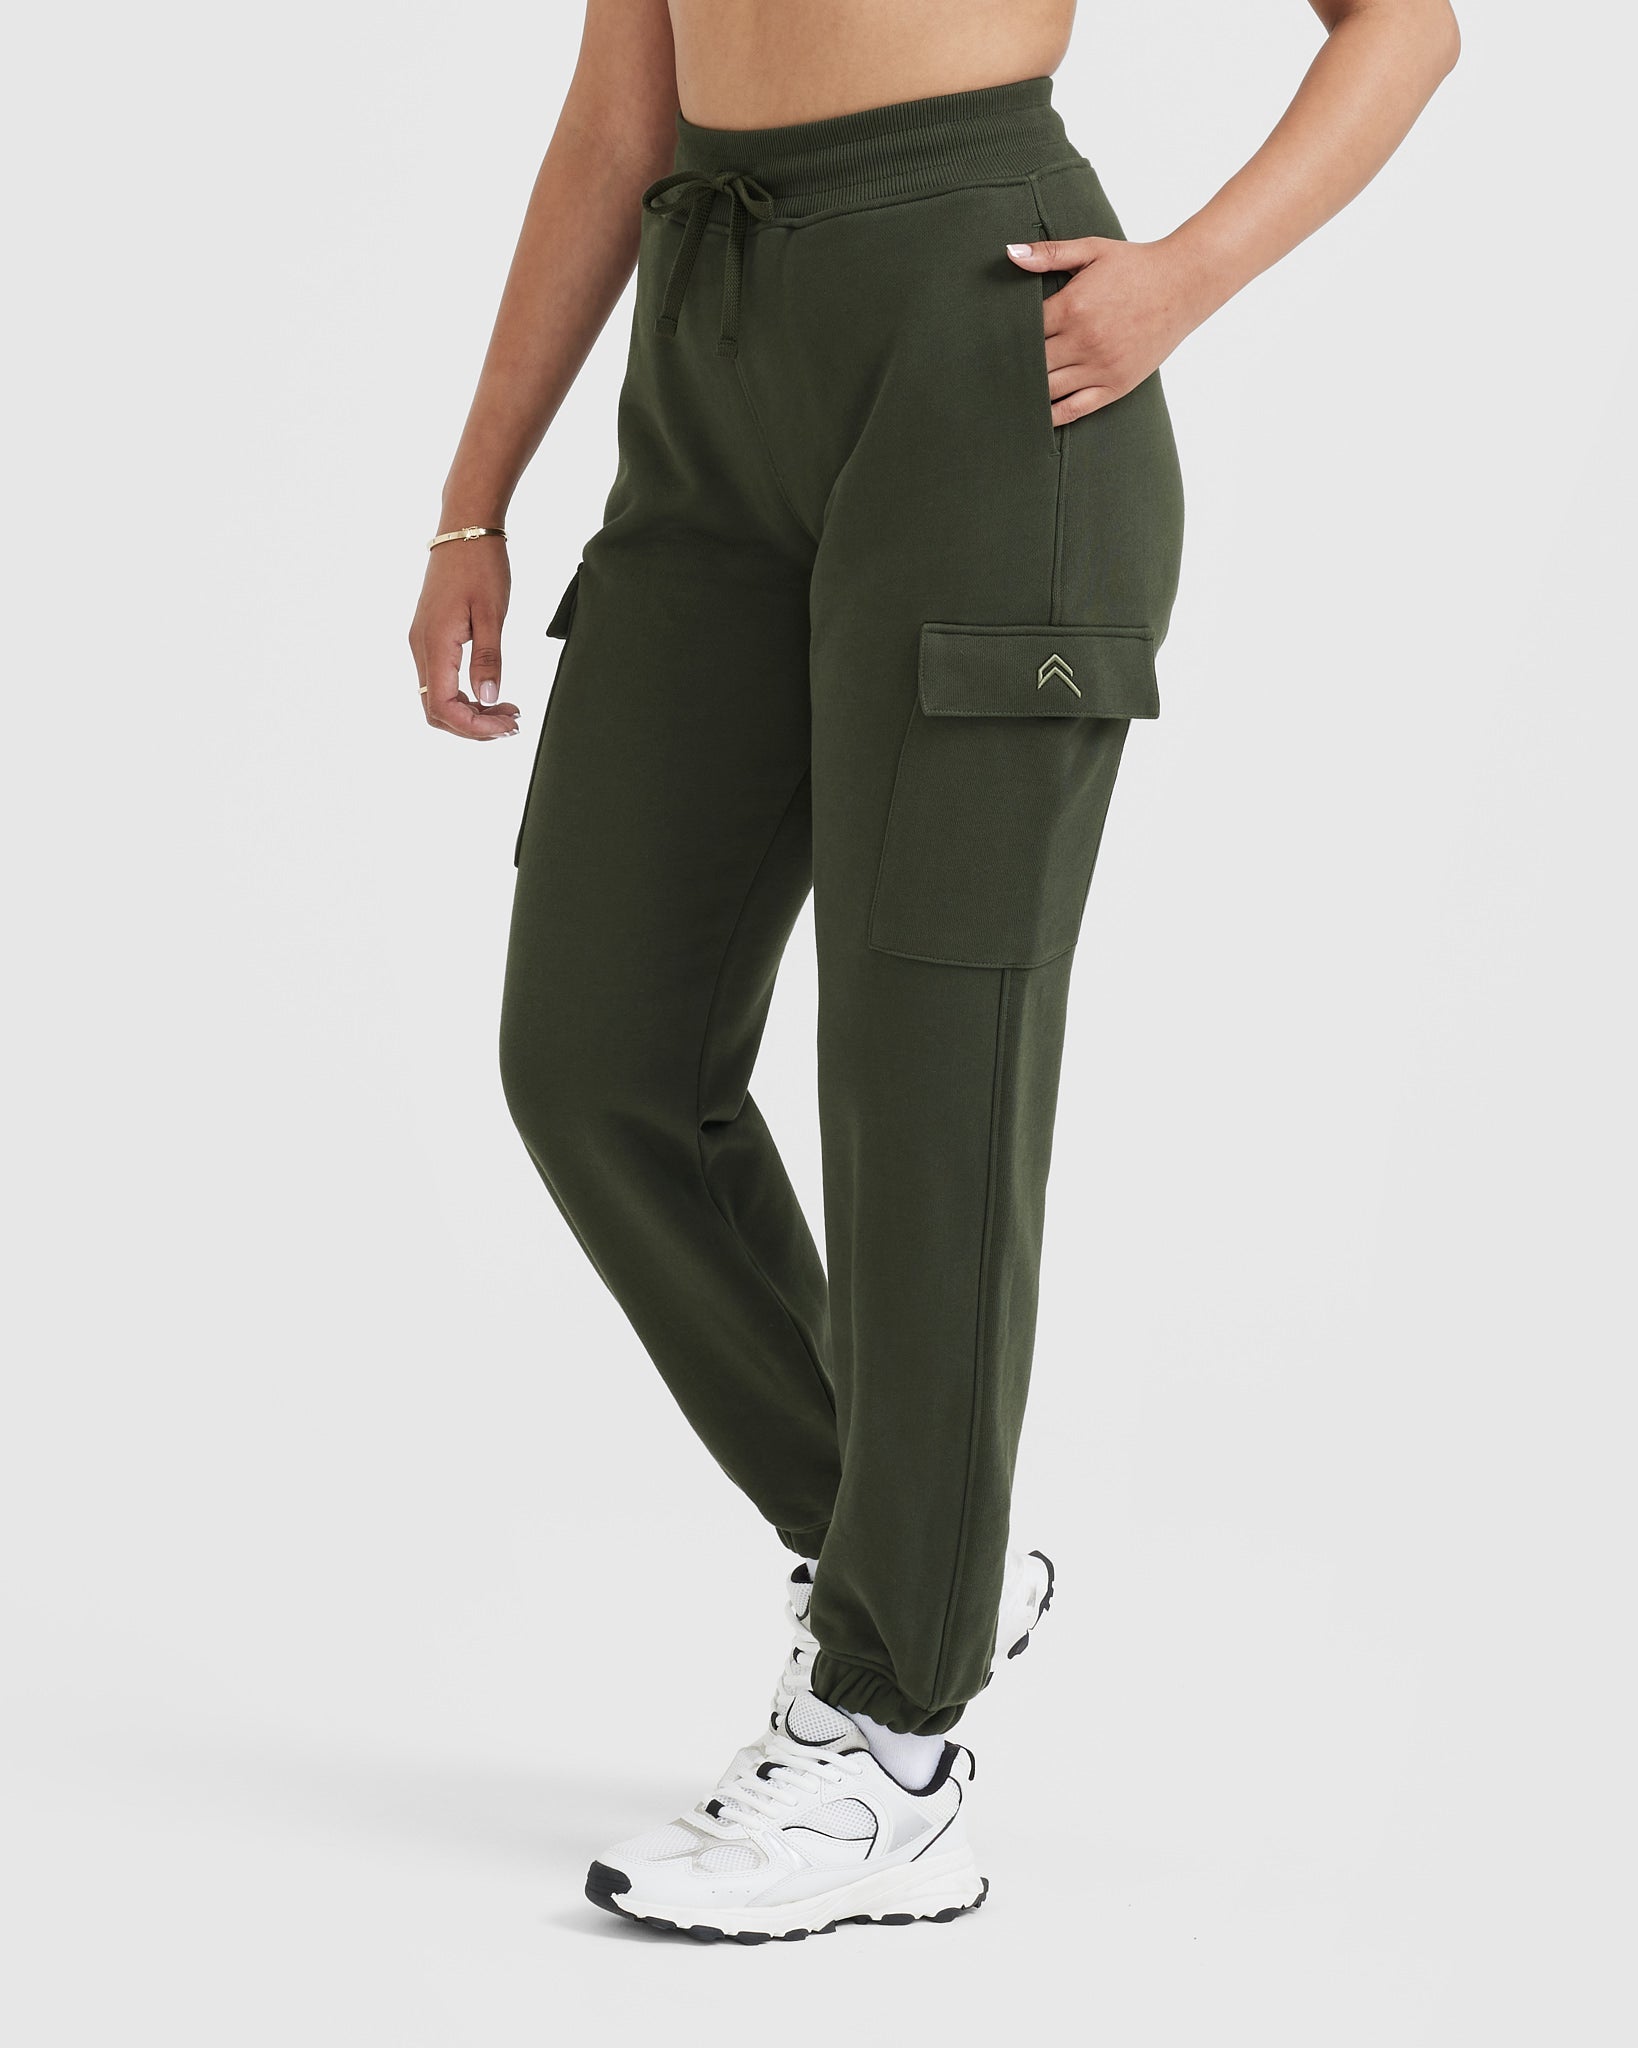 MOUEEY Women's Cargo Joggers Lightweight Quick Dry Athletic Water Resistant  Lounge Casual Pants with Zipper Pockets (ArmyGreen - ShopStyle